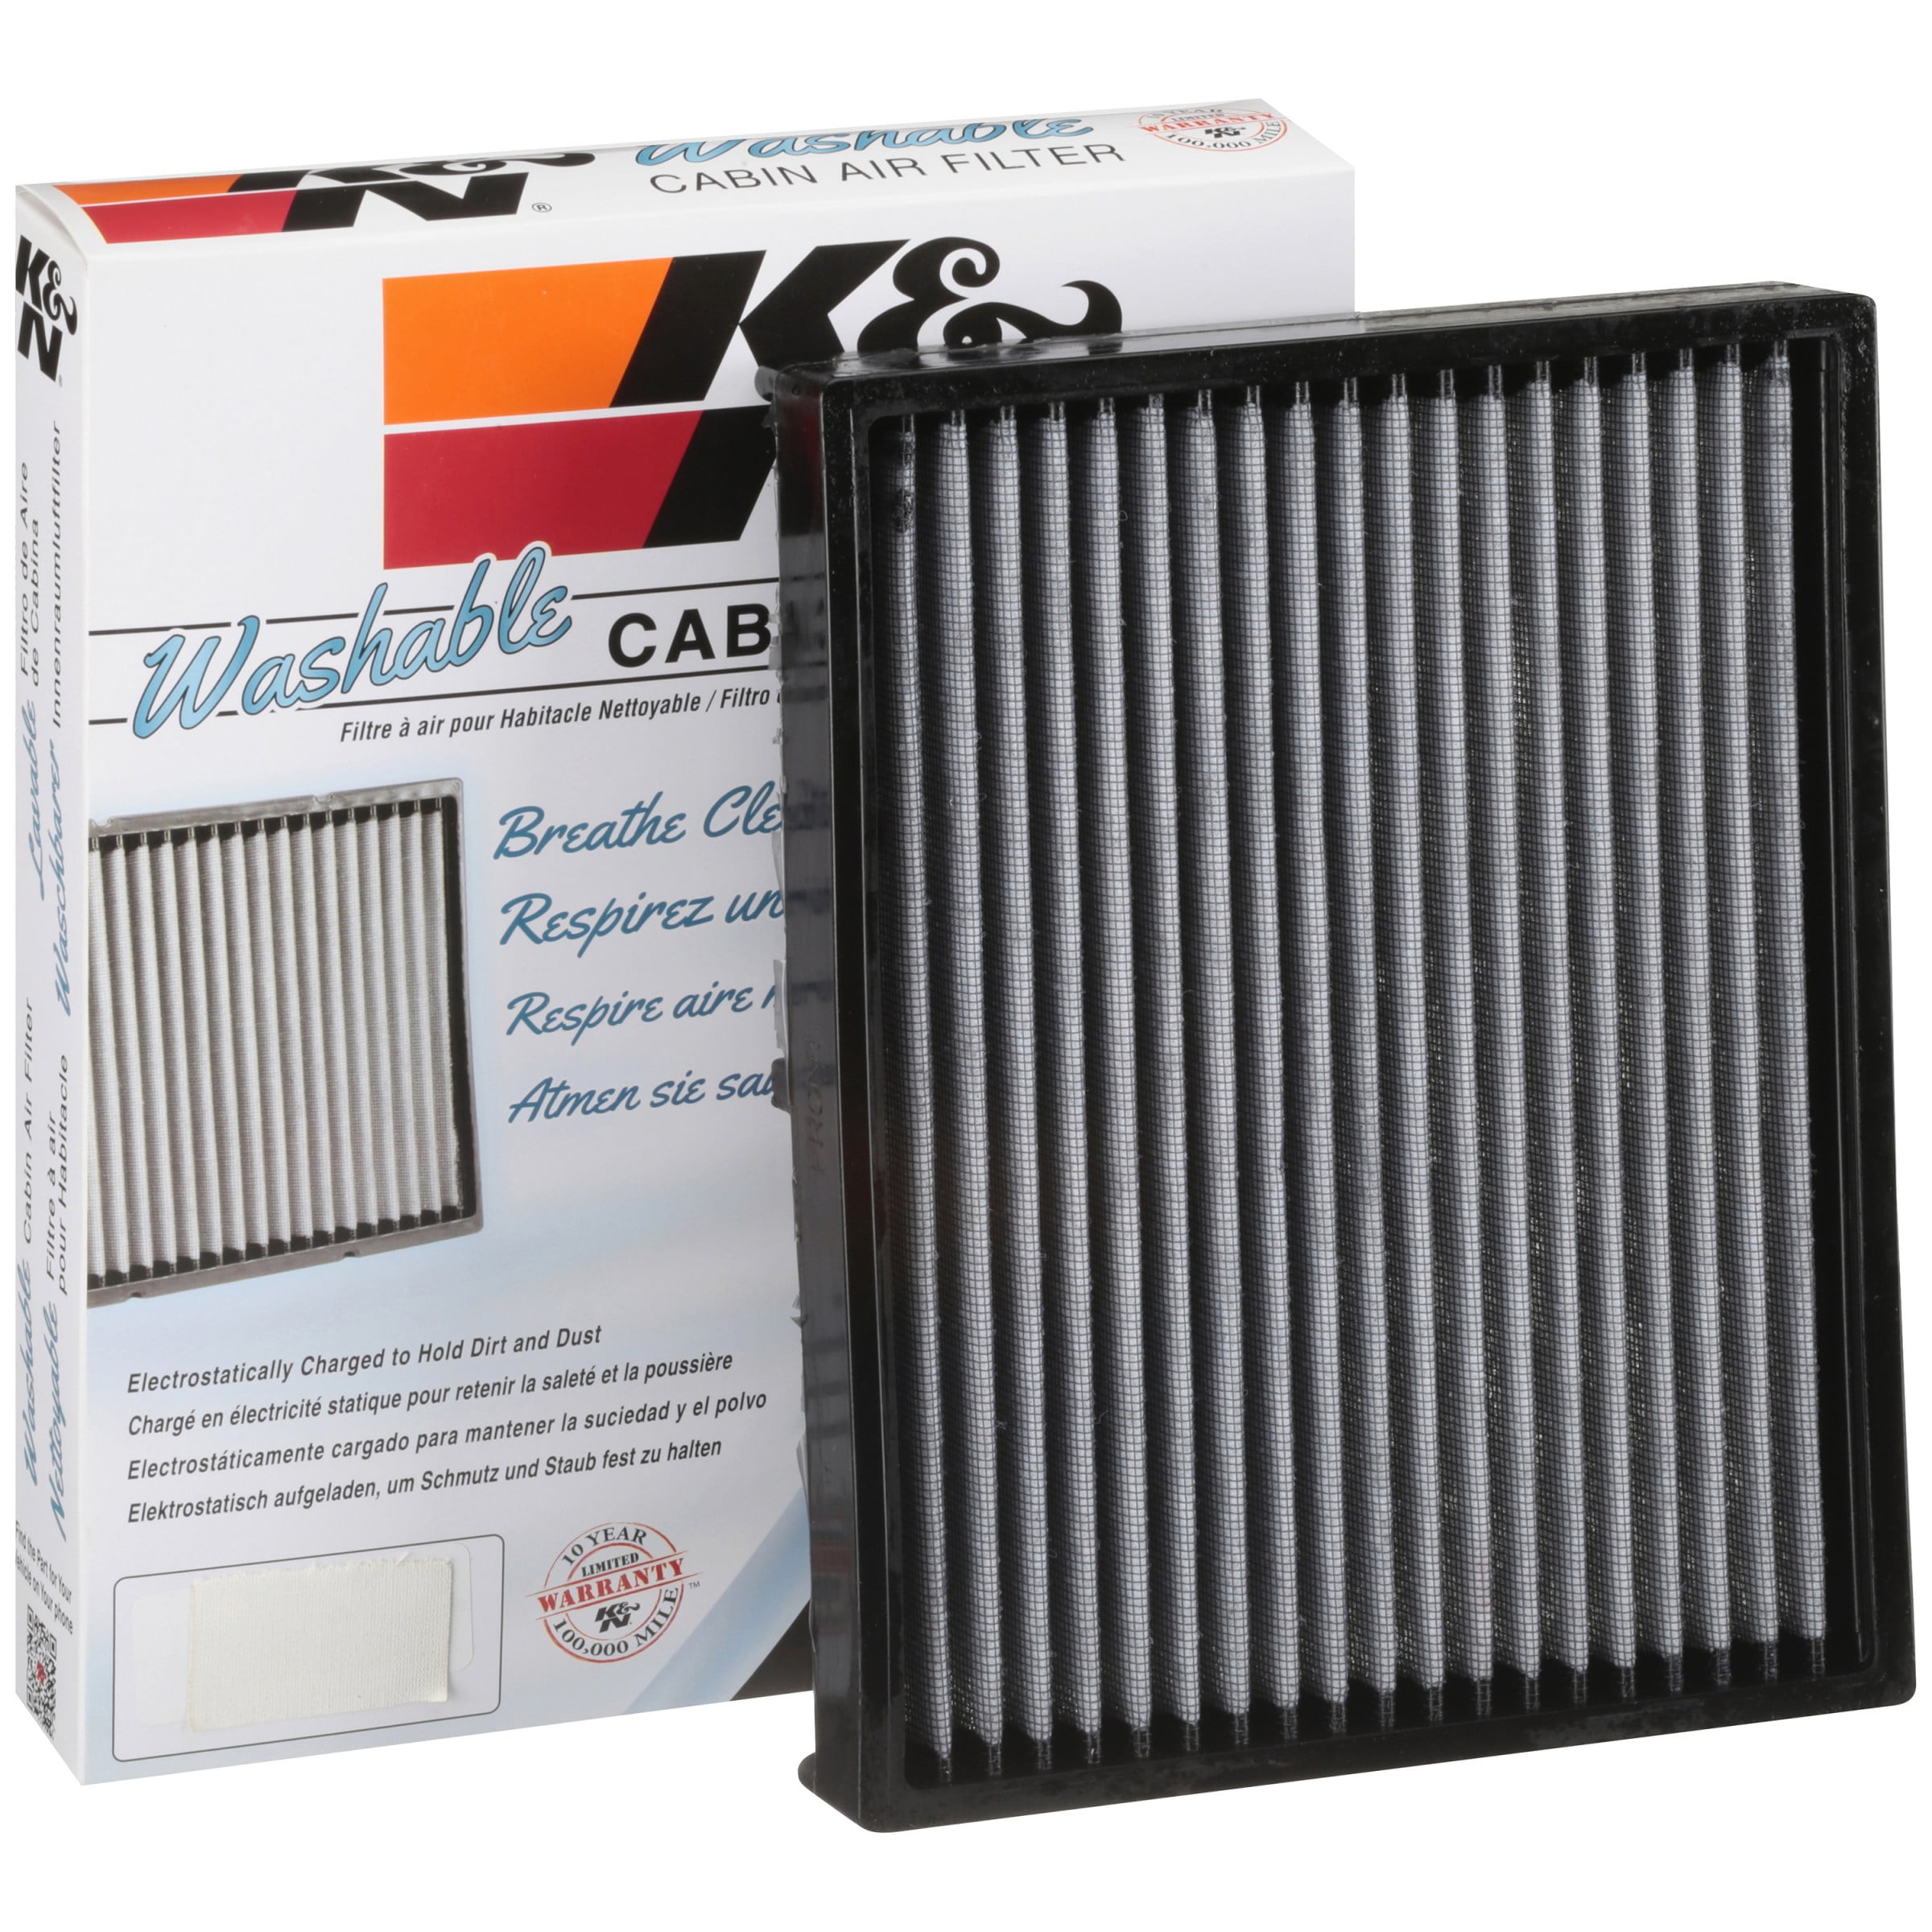 Acura K&N Engineering K&N VF2022 Washable & Reusable Cabin Air Filter Cleans and Freshens Incoming Air for your Honda